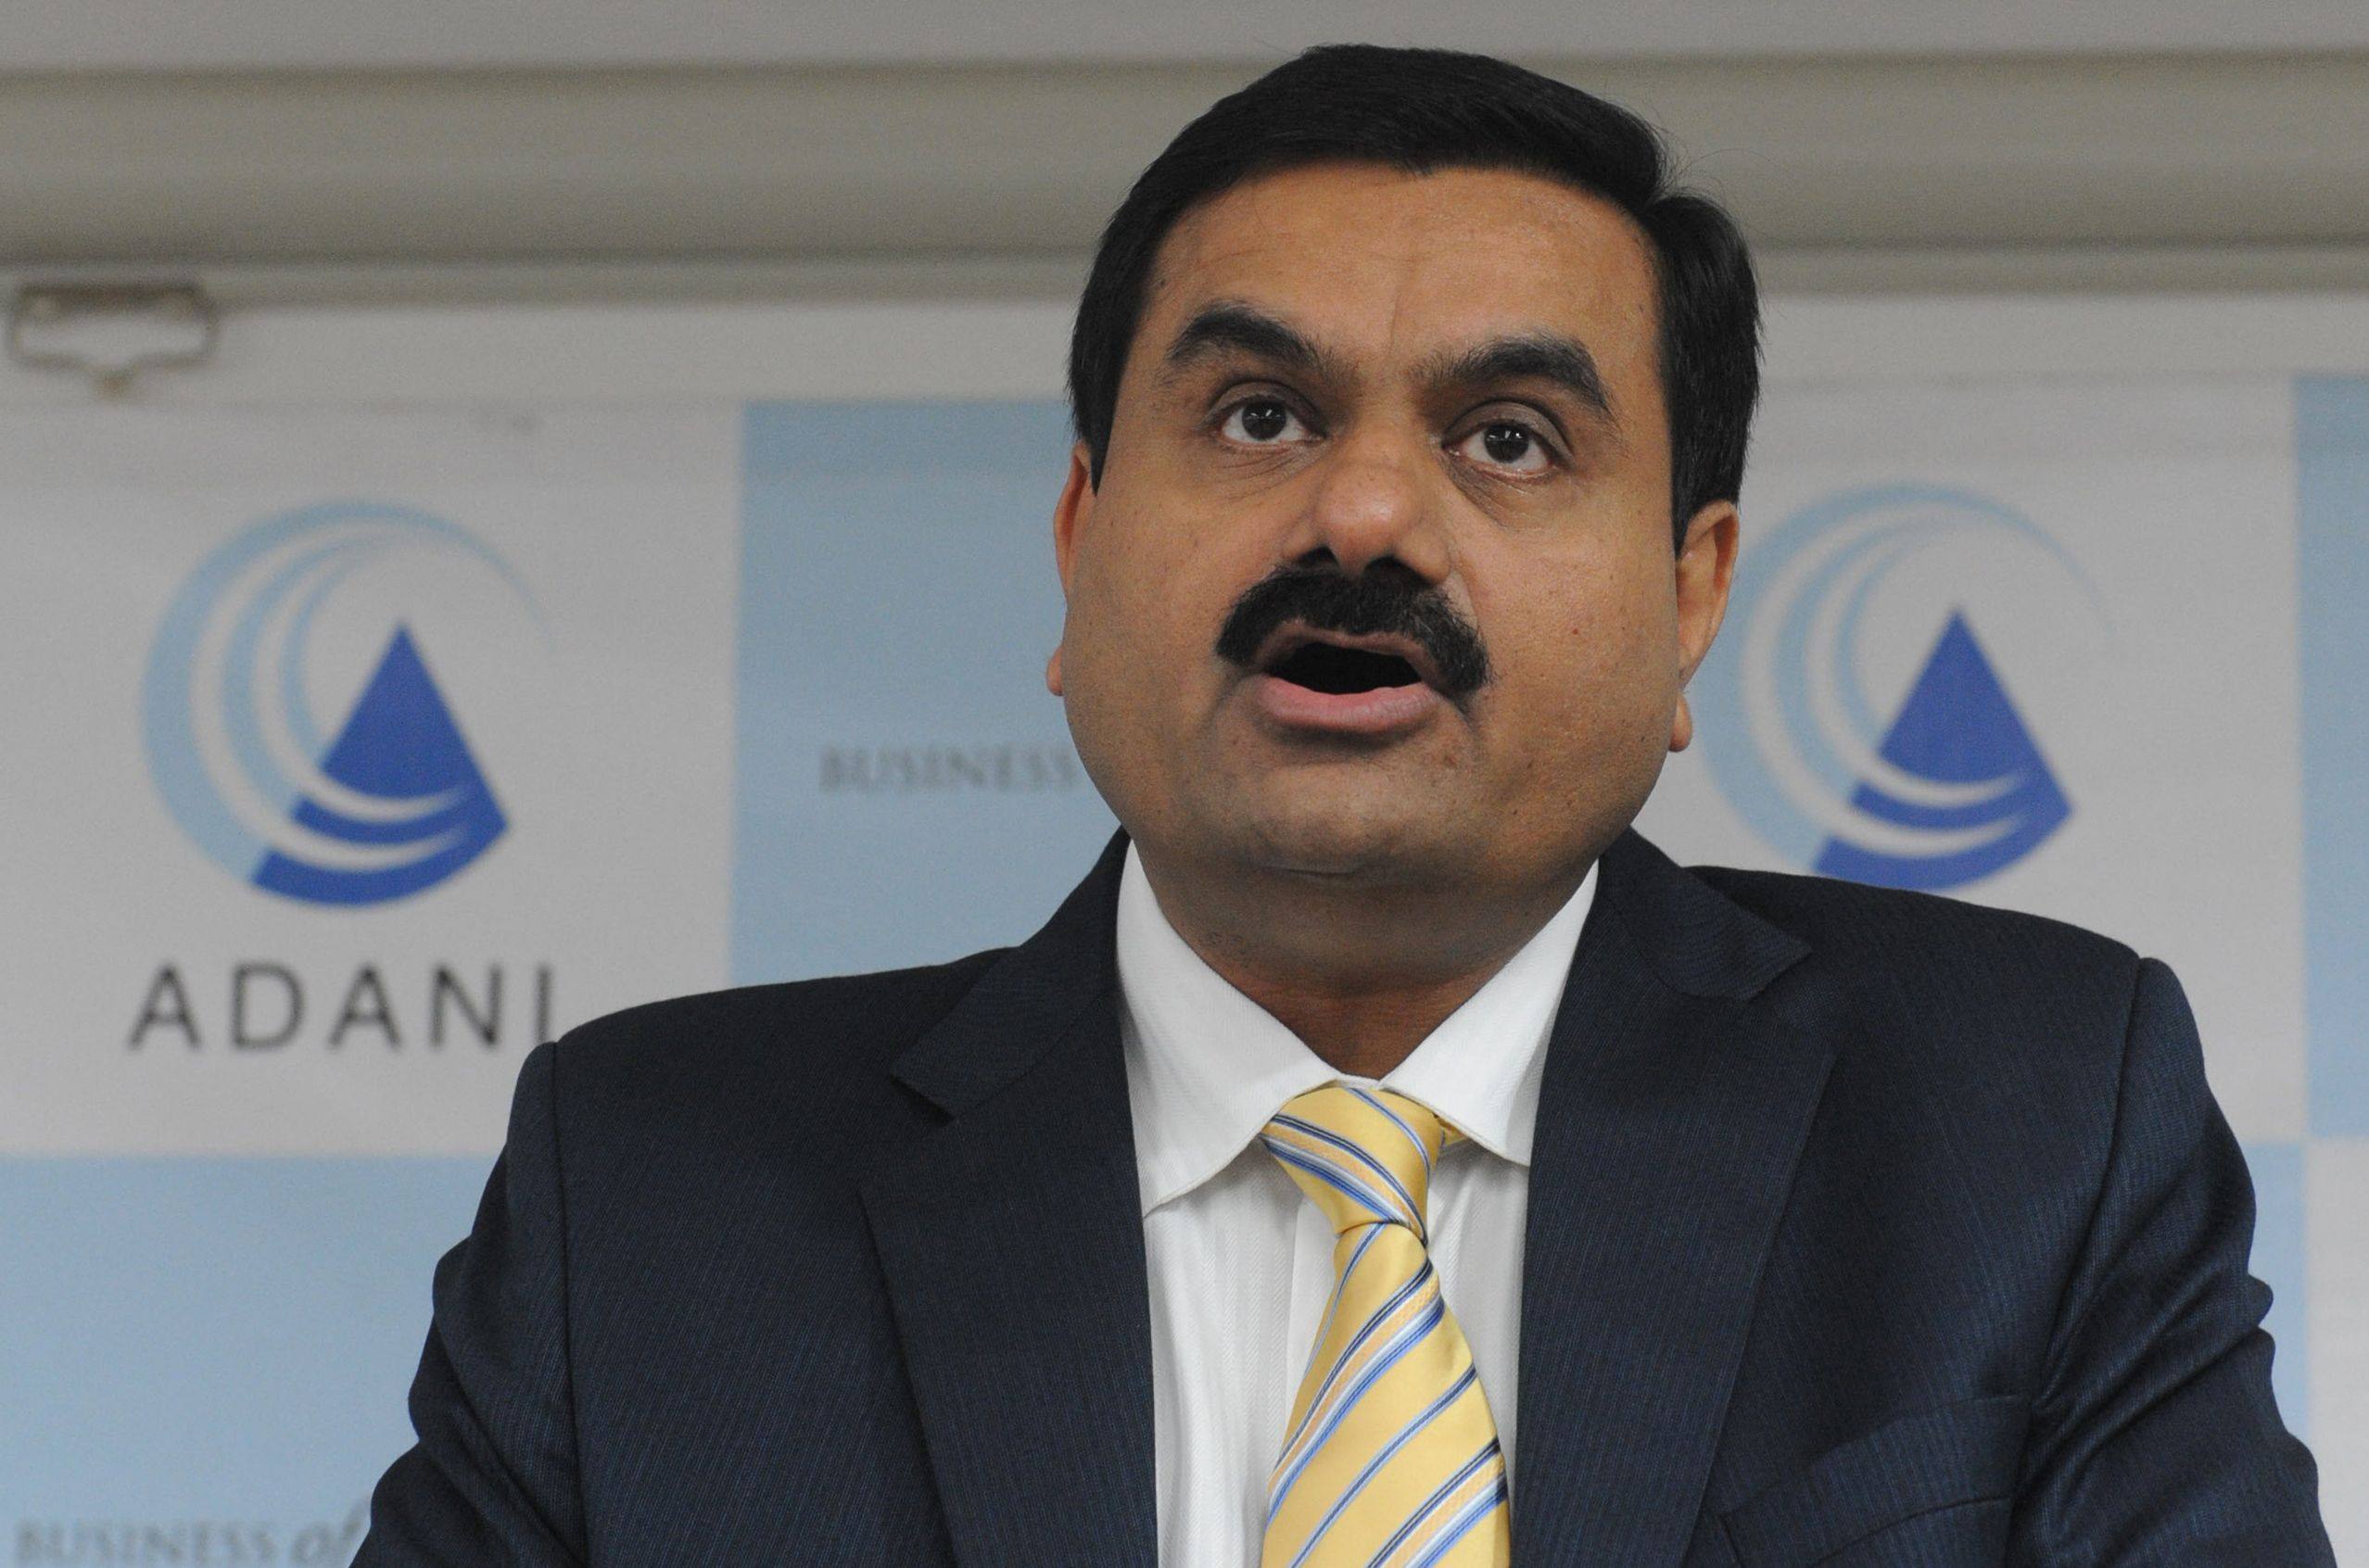 Indian industrialist Gautam Adani became the world’s second-richest person on Forbes’ real-time billionaire tracker on September 16 weeks after becoming the first Asian to break into the top three. Photo: AFP